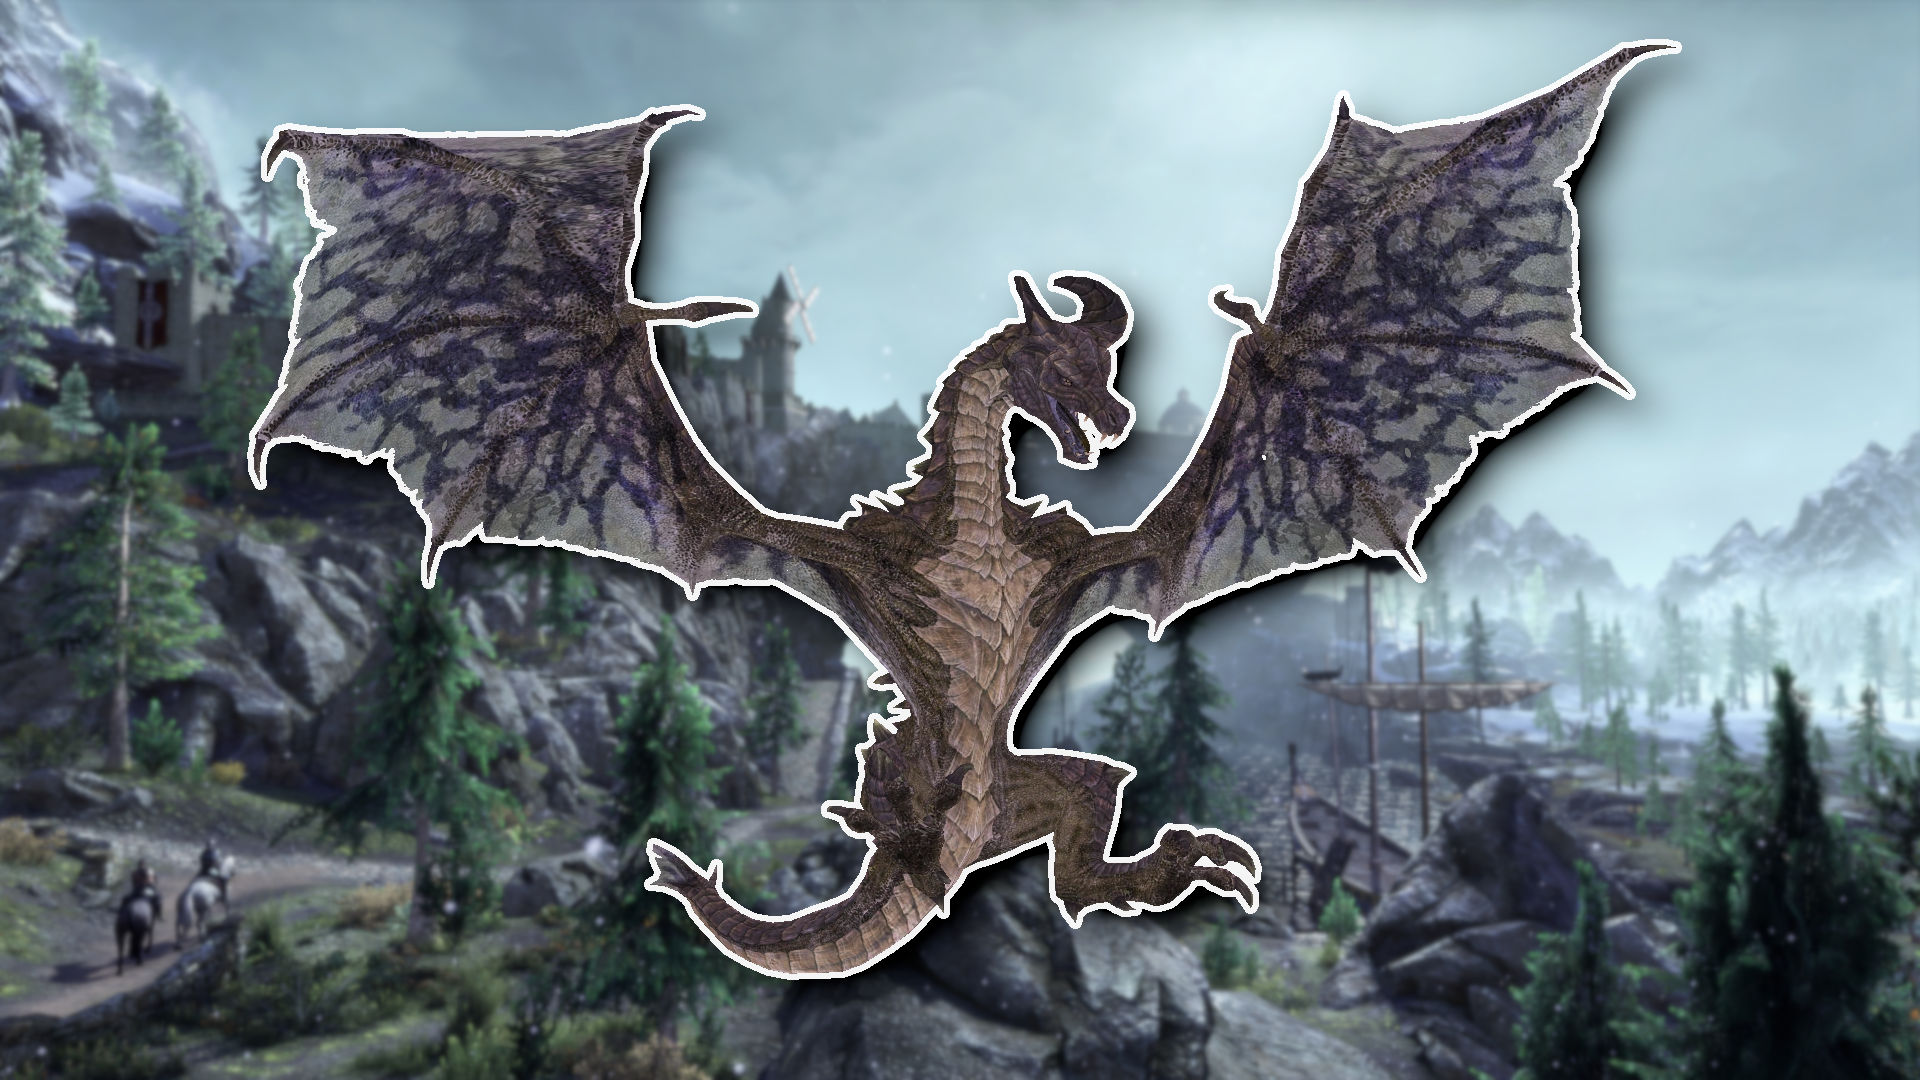 Skyrim dragon names, types, and locations